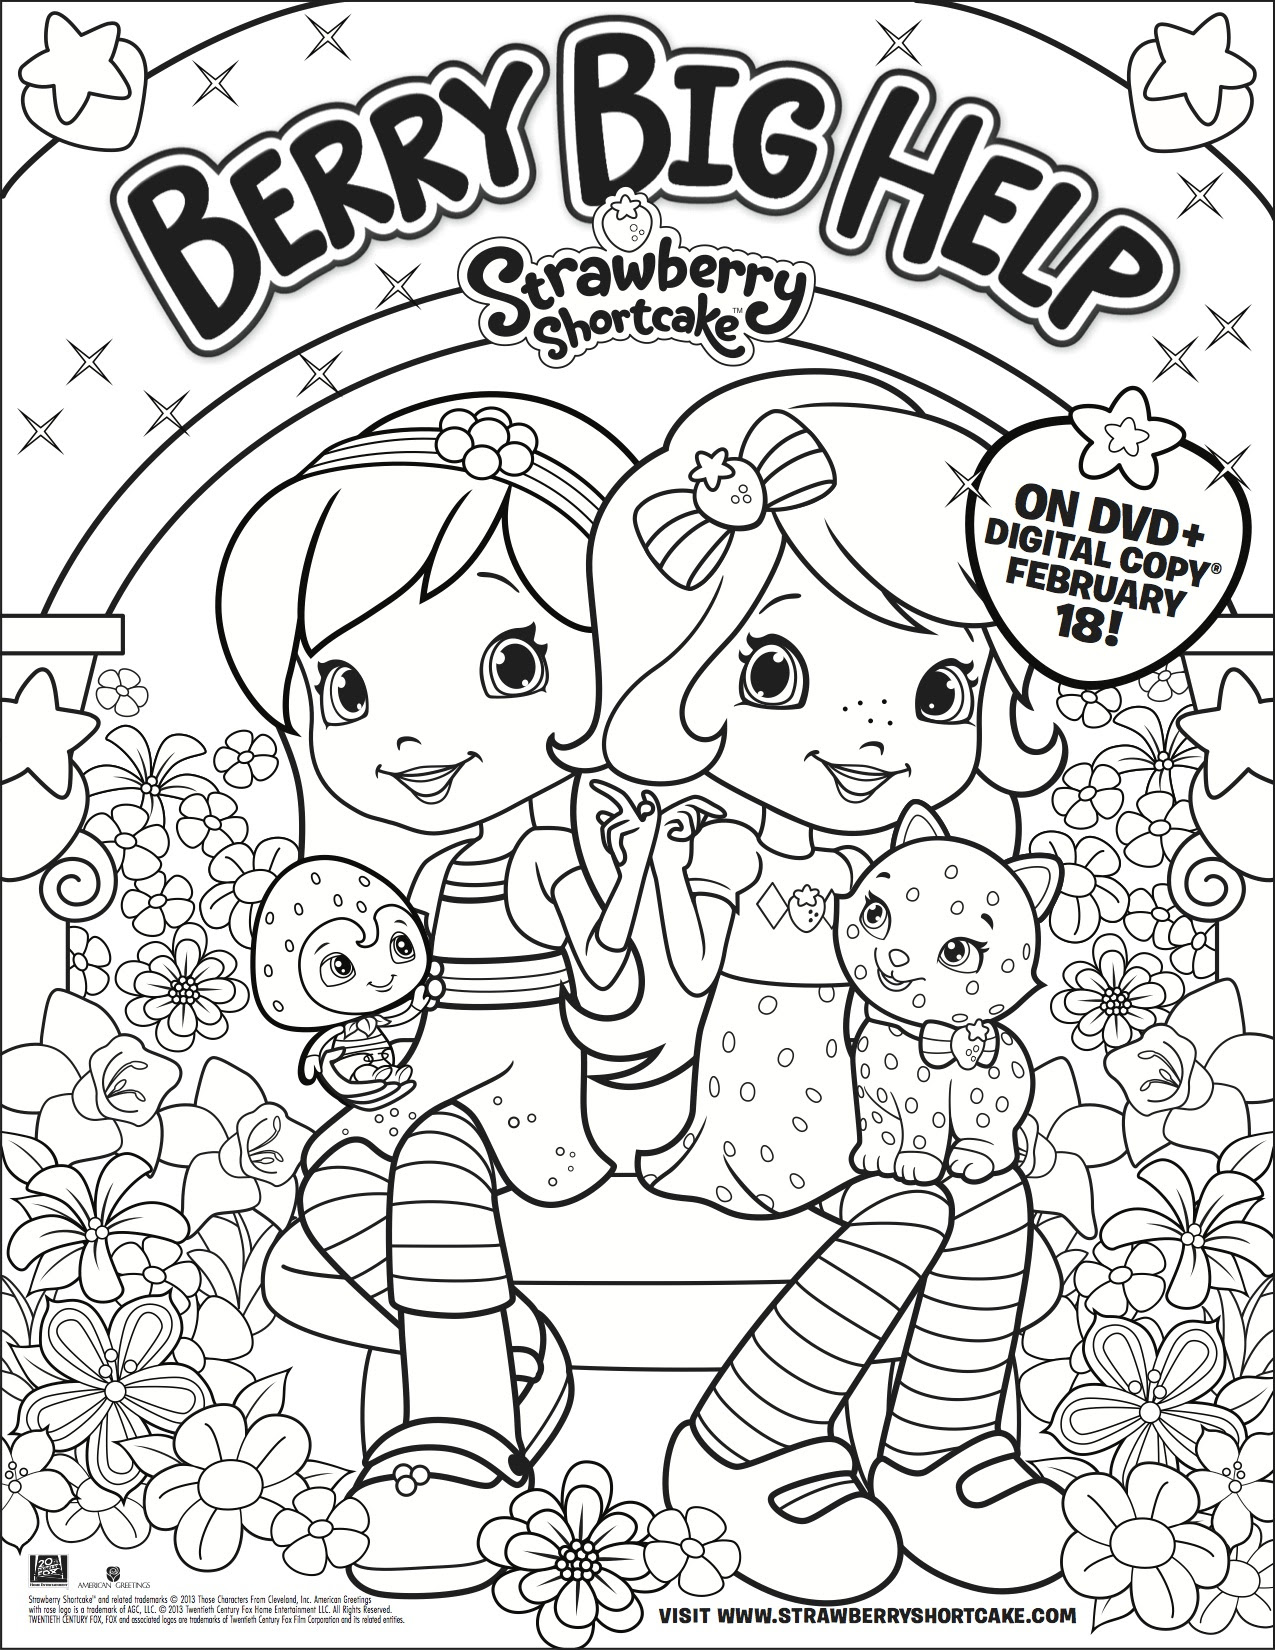 Strawberry Shortcake Coloring Page - Long Wait For Isabella